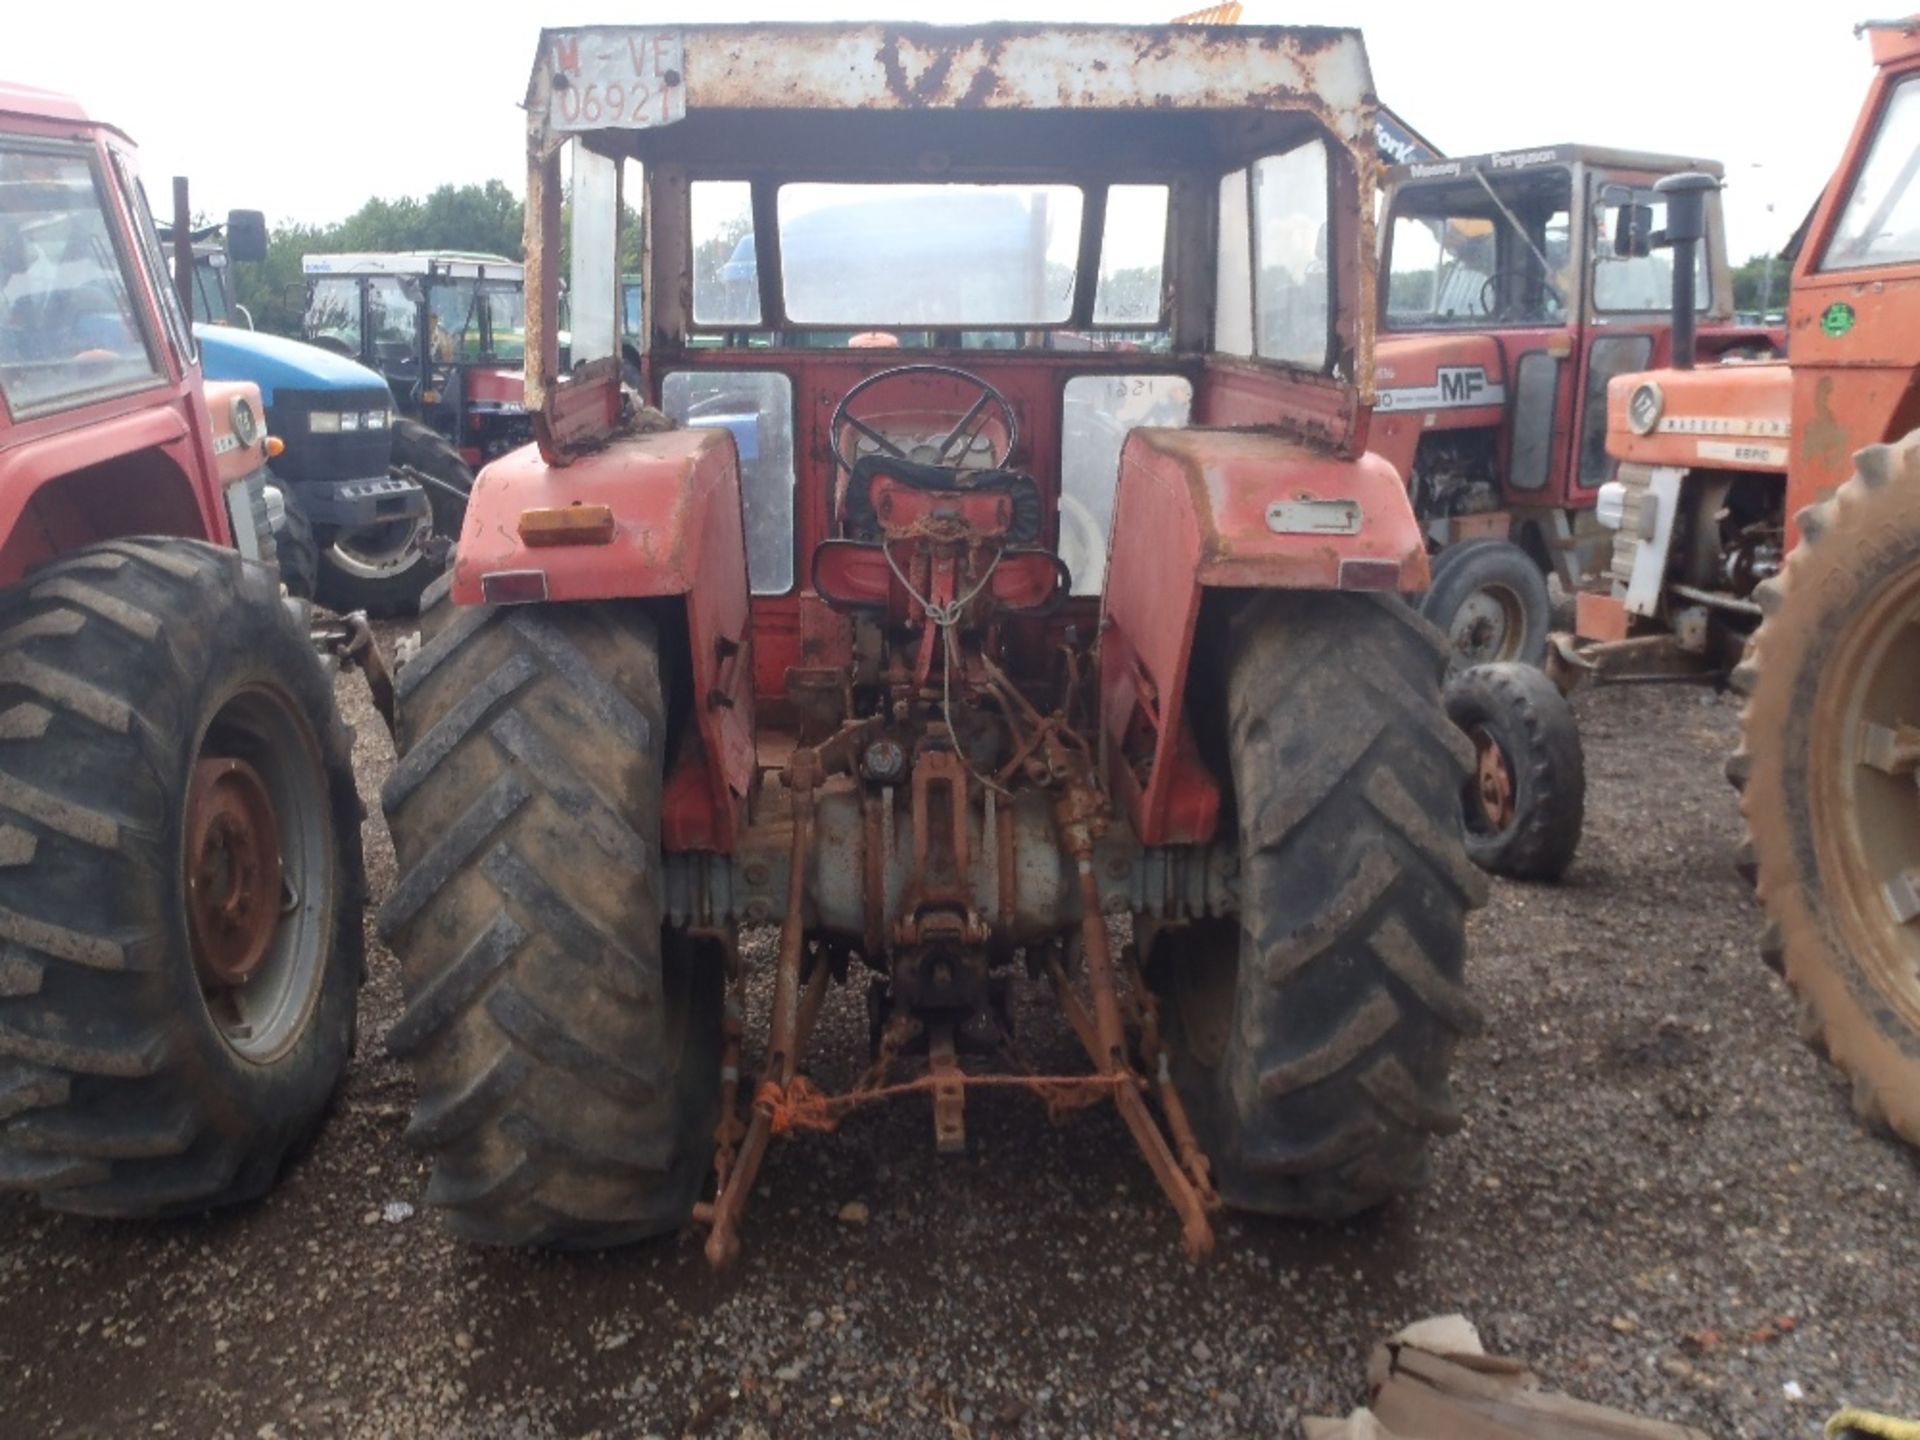 Massey Ferguson 165 2wd Tractor With 212 Engine, Cab & Power Steering - Image 4 of 8